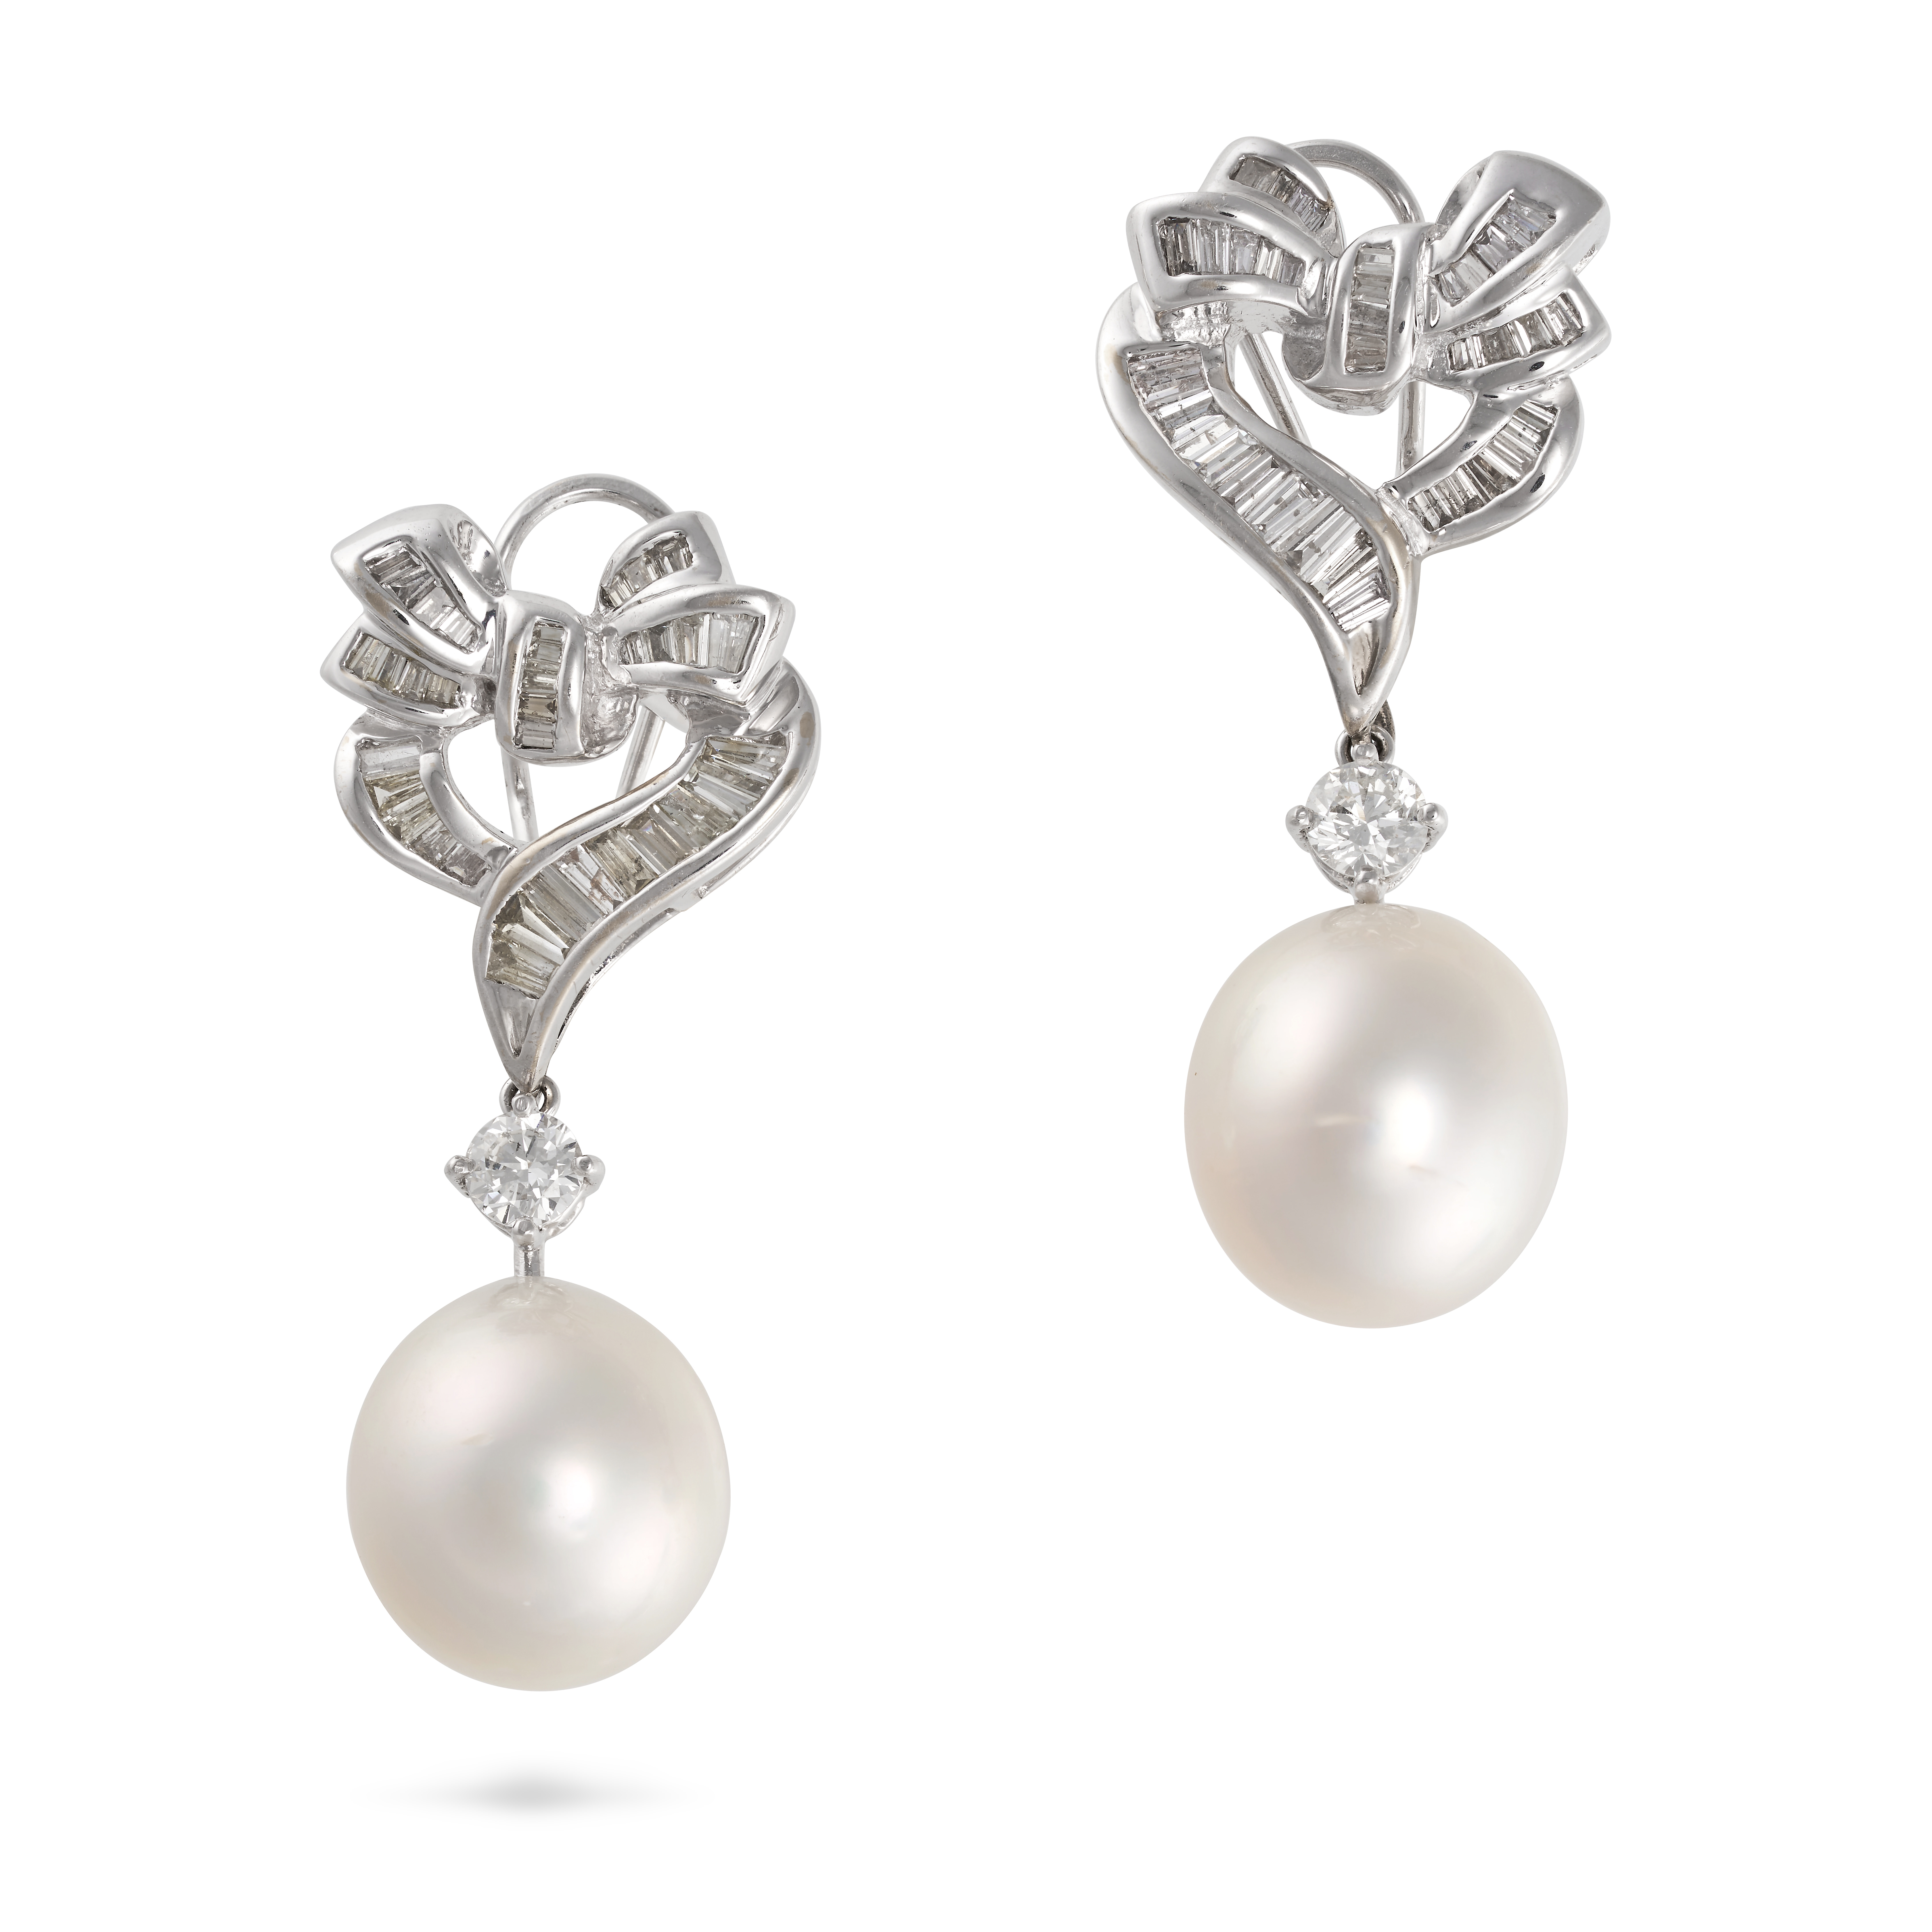 NO RESERVE - A PAIR OF PEARL AND DIAMOND DROP EARRINGS in 18ct white gold, each comprising a bow ...